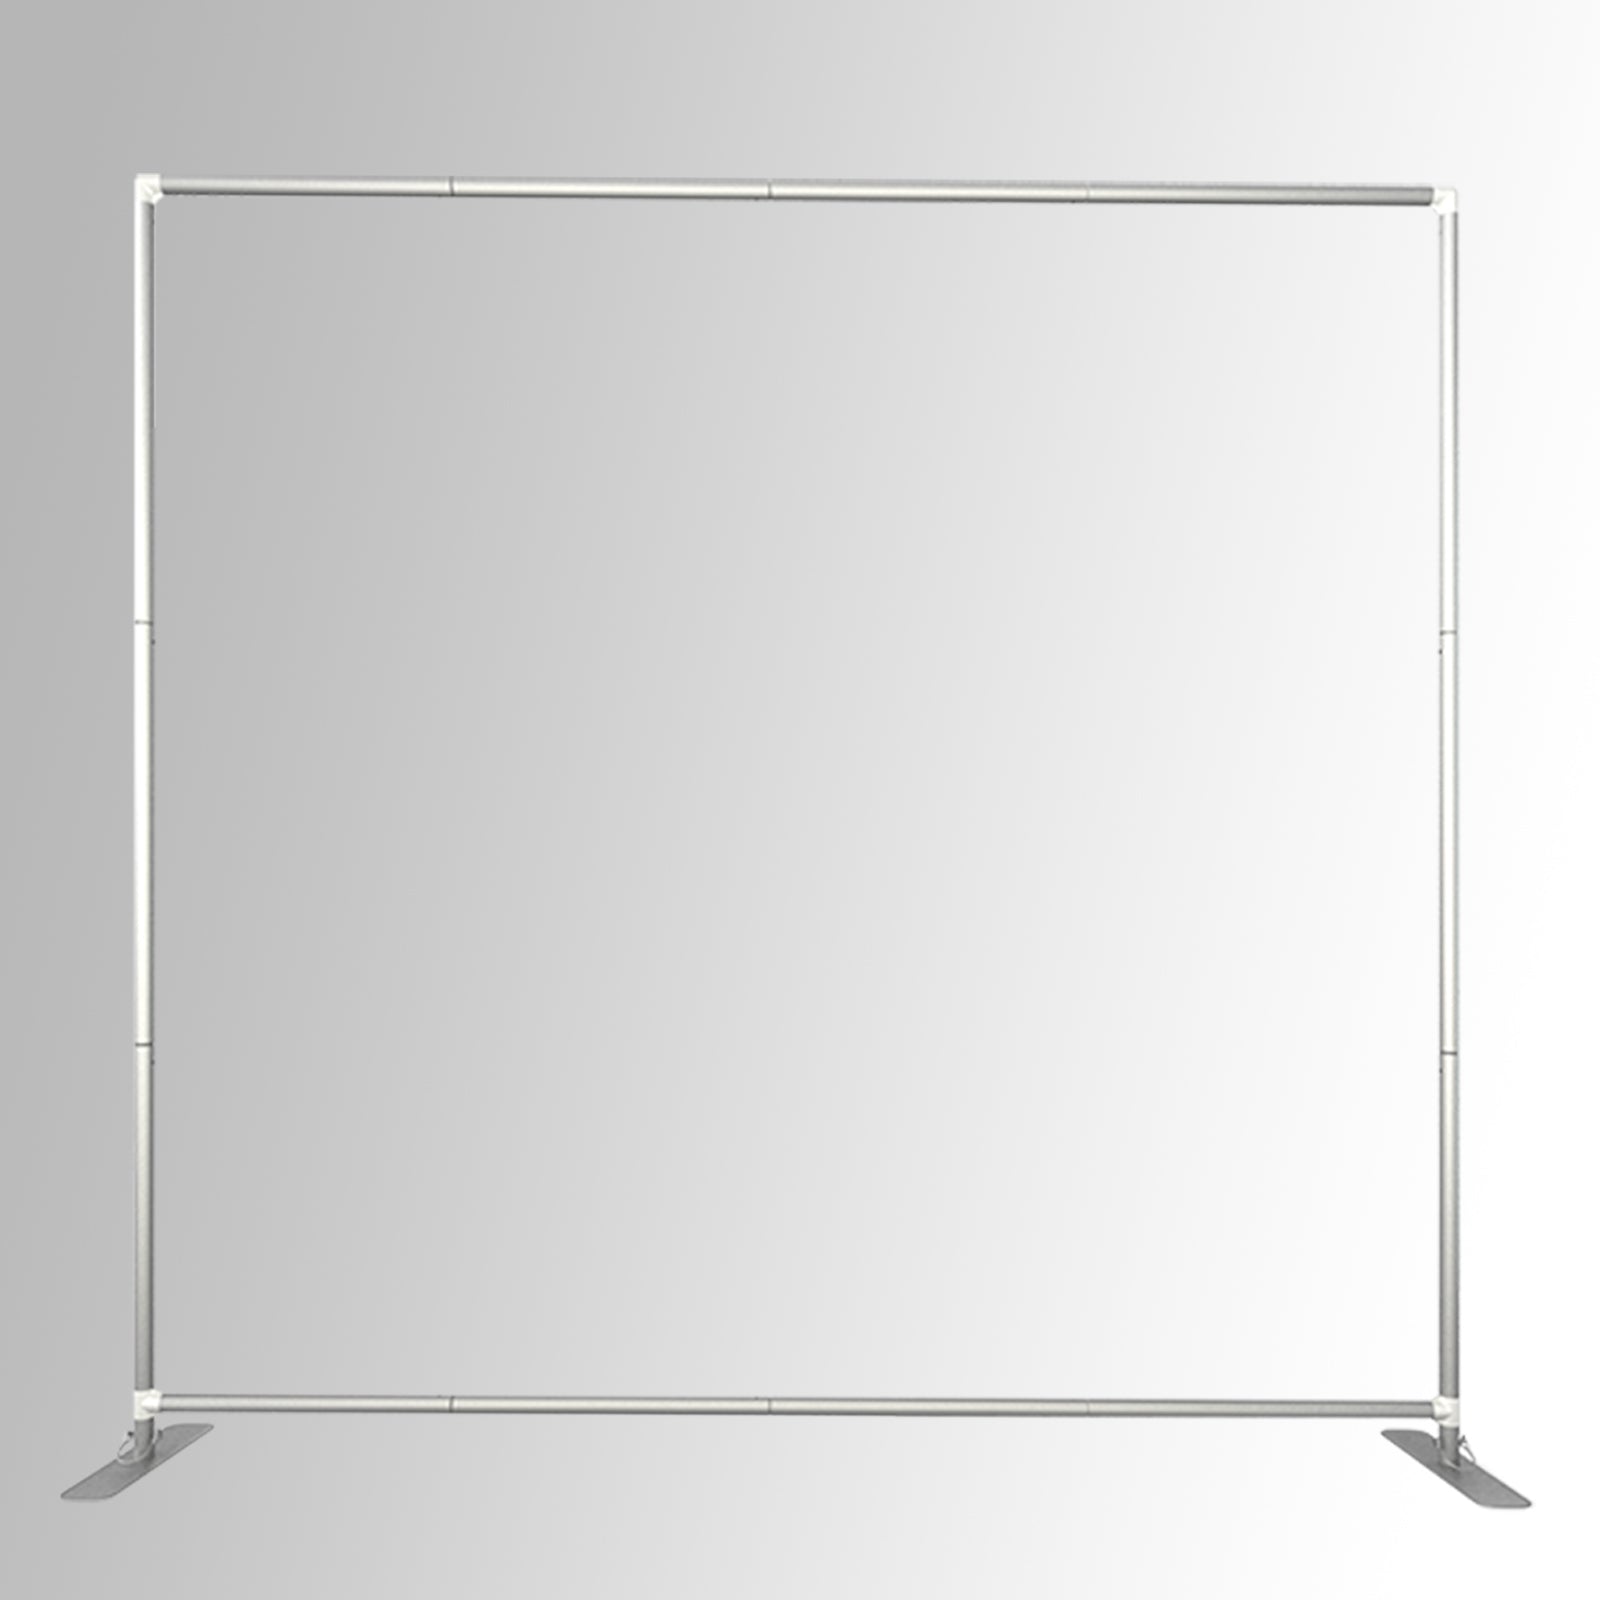 8*8FT Tension Fabric Display EZ Tube Frame Backdrop Banner Stand